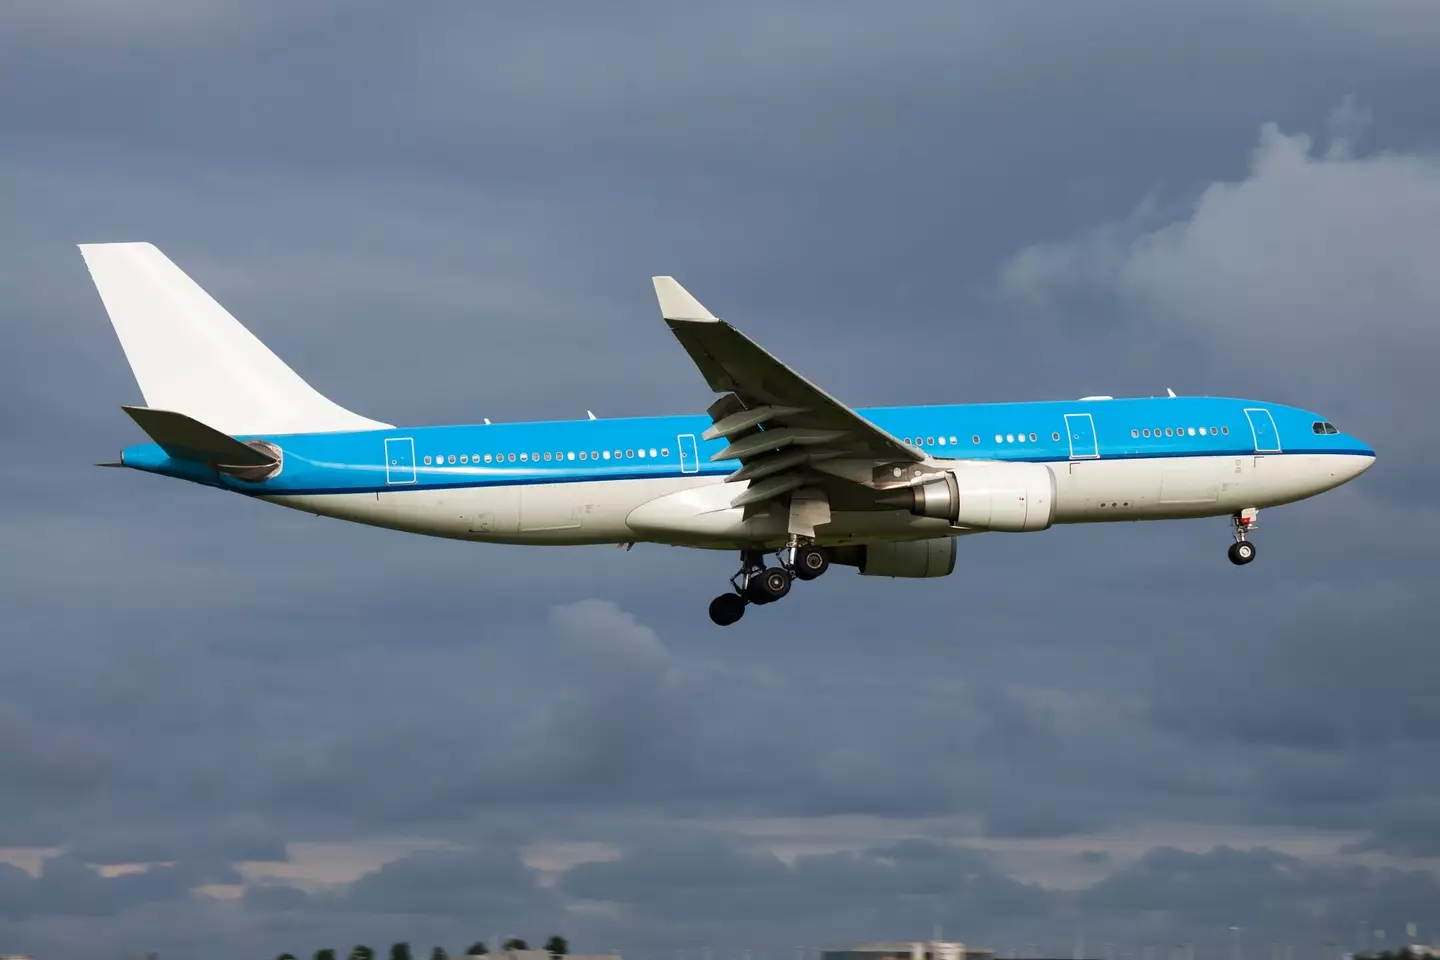 There have been safety concerns regarding the Boeing 787 Dreamliner in particular.